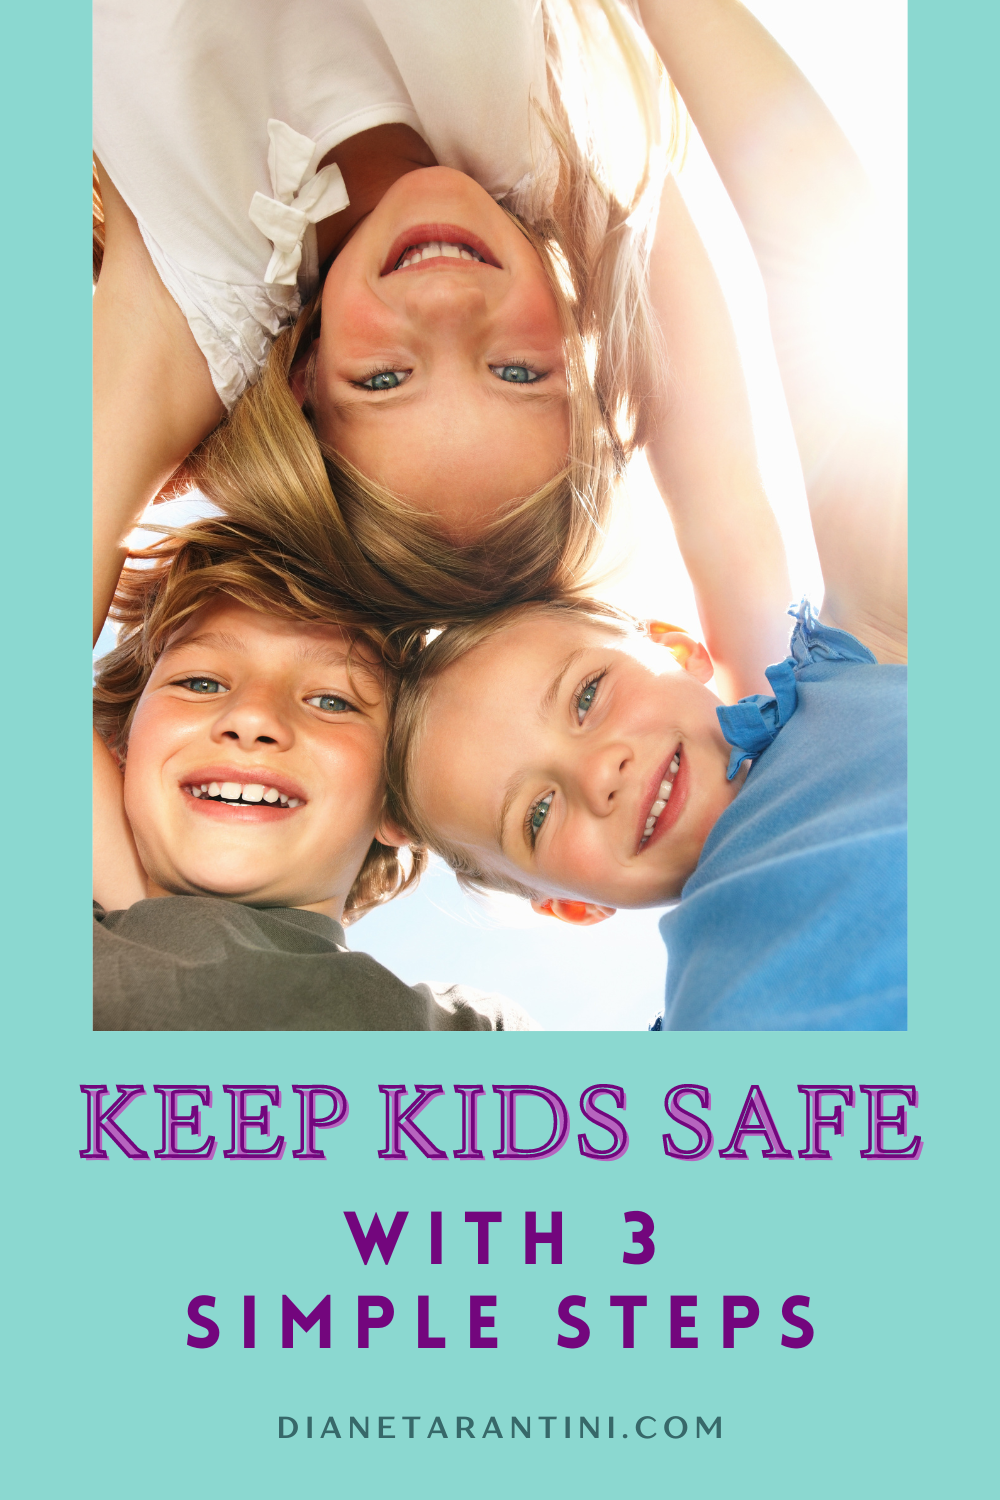 How to Keep Kids Safe with 3 Simple Steps